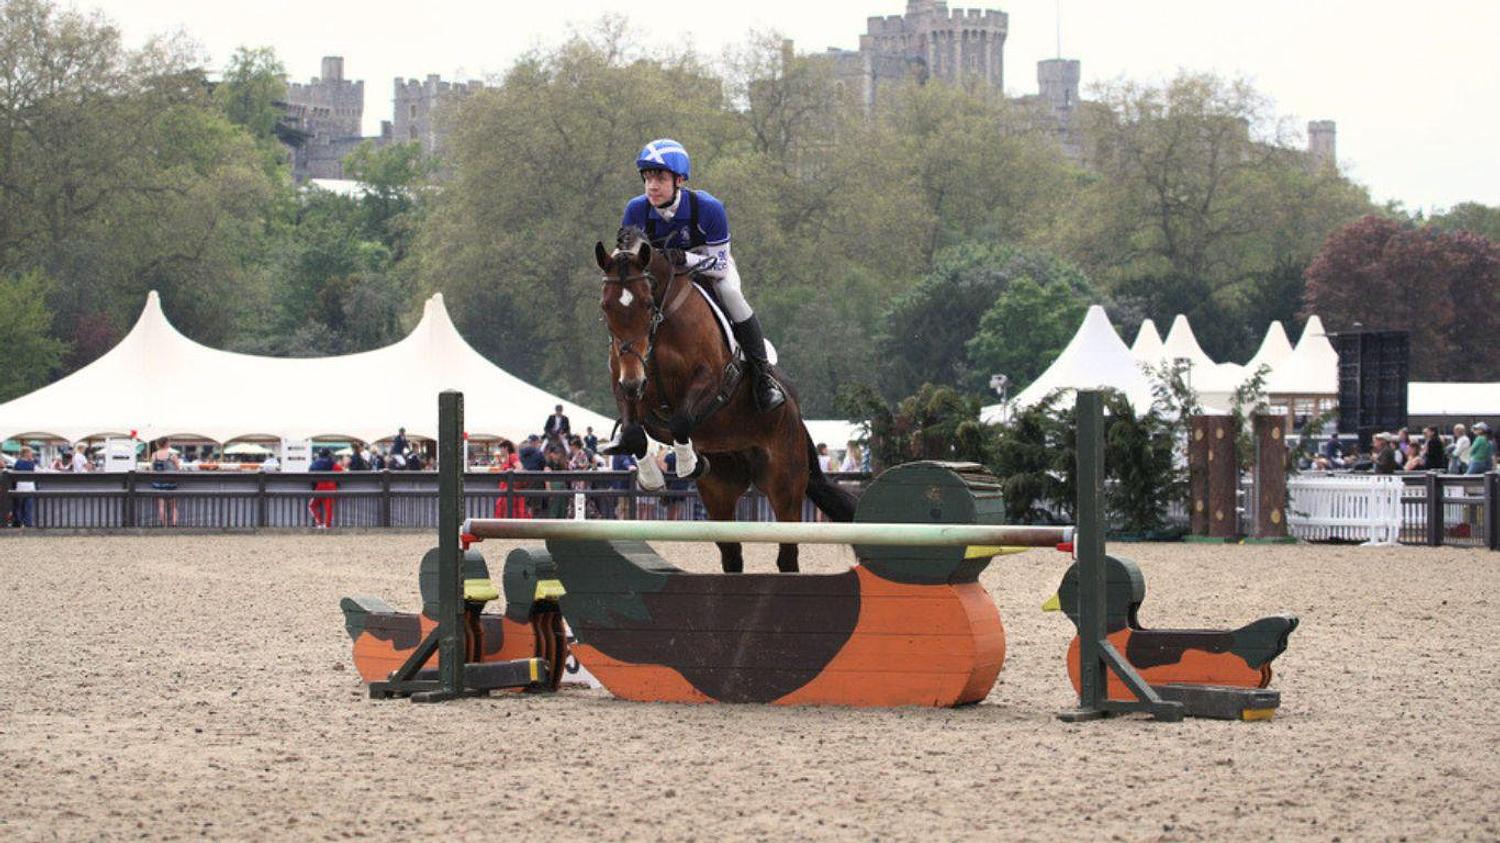 Against the odds: Jacob overcomes injury to win at Royal Windsor Horse Show